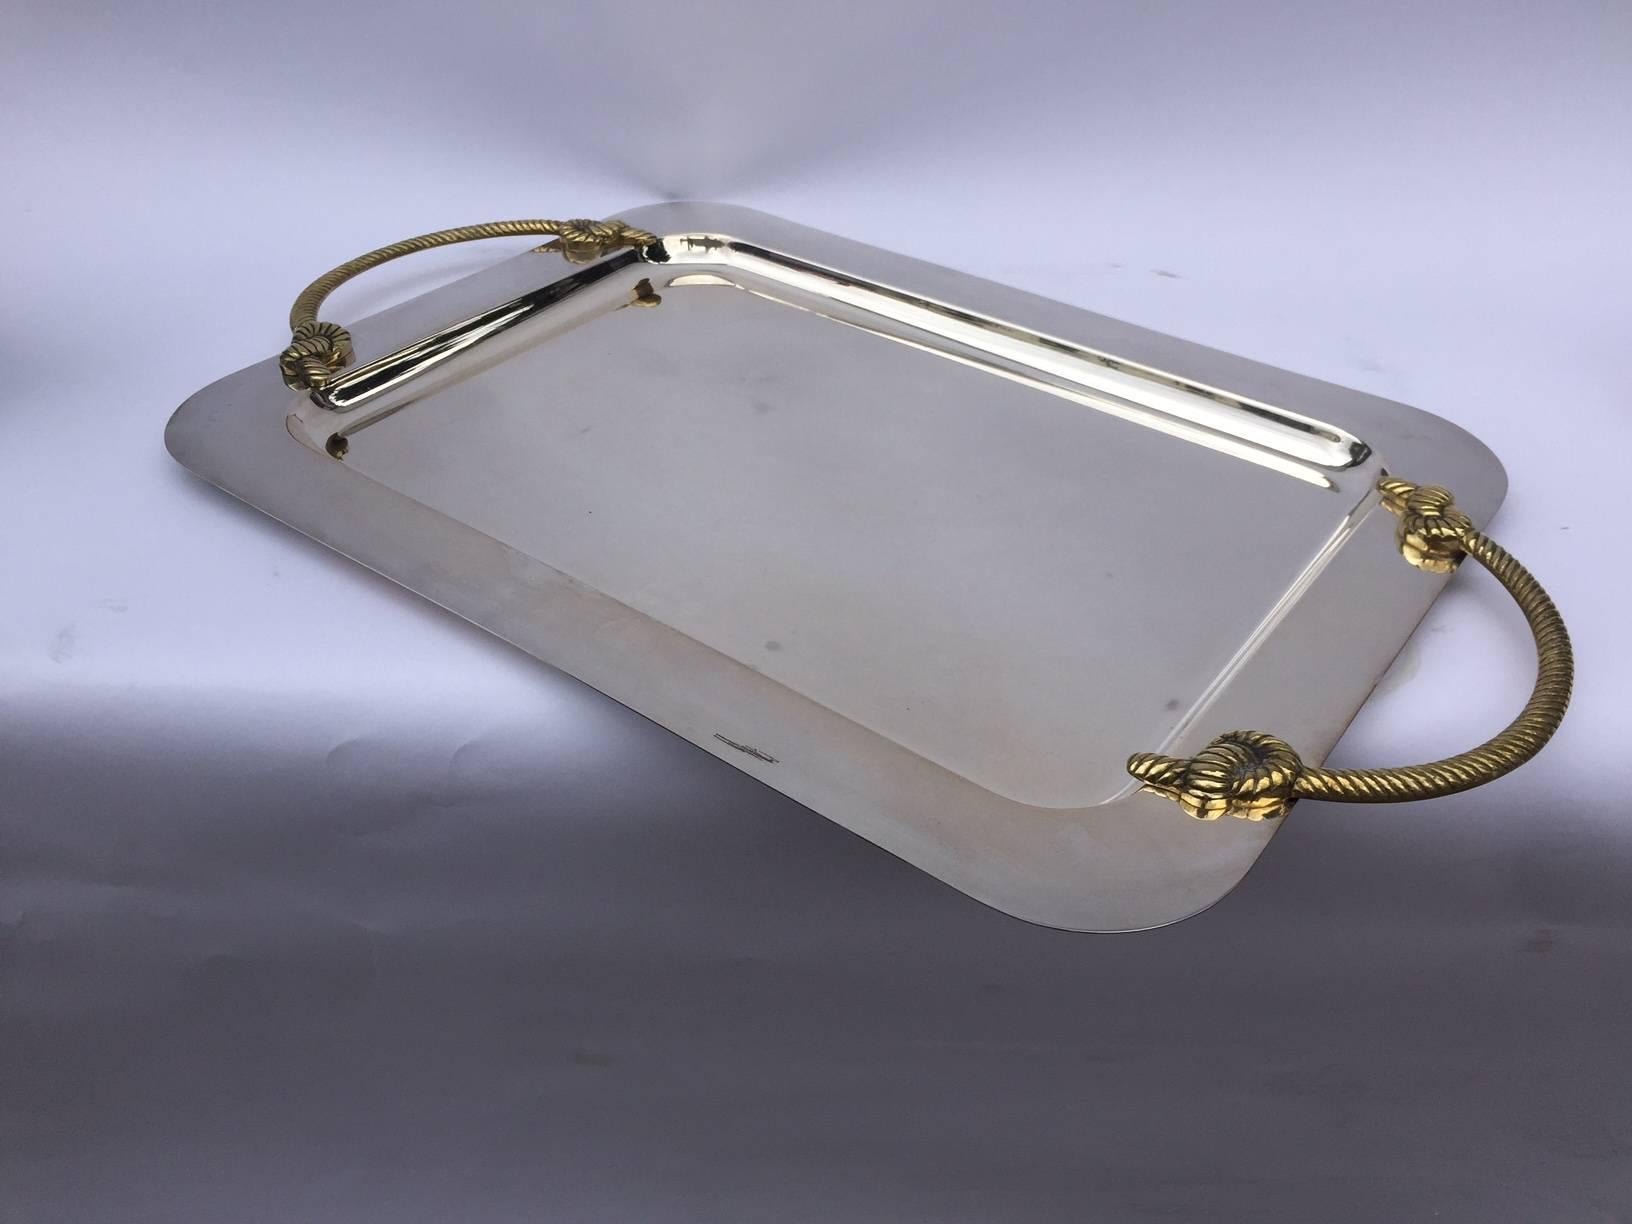 Chrome-plated tray with attached decorative brass handles in the shape of the rope, in the style of L.Sabattini, circa 1960s, Italian.